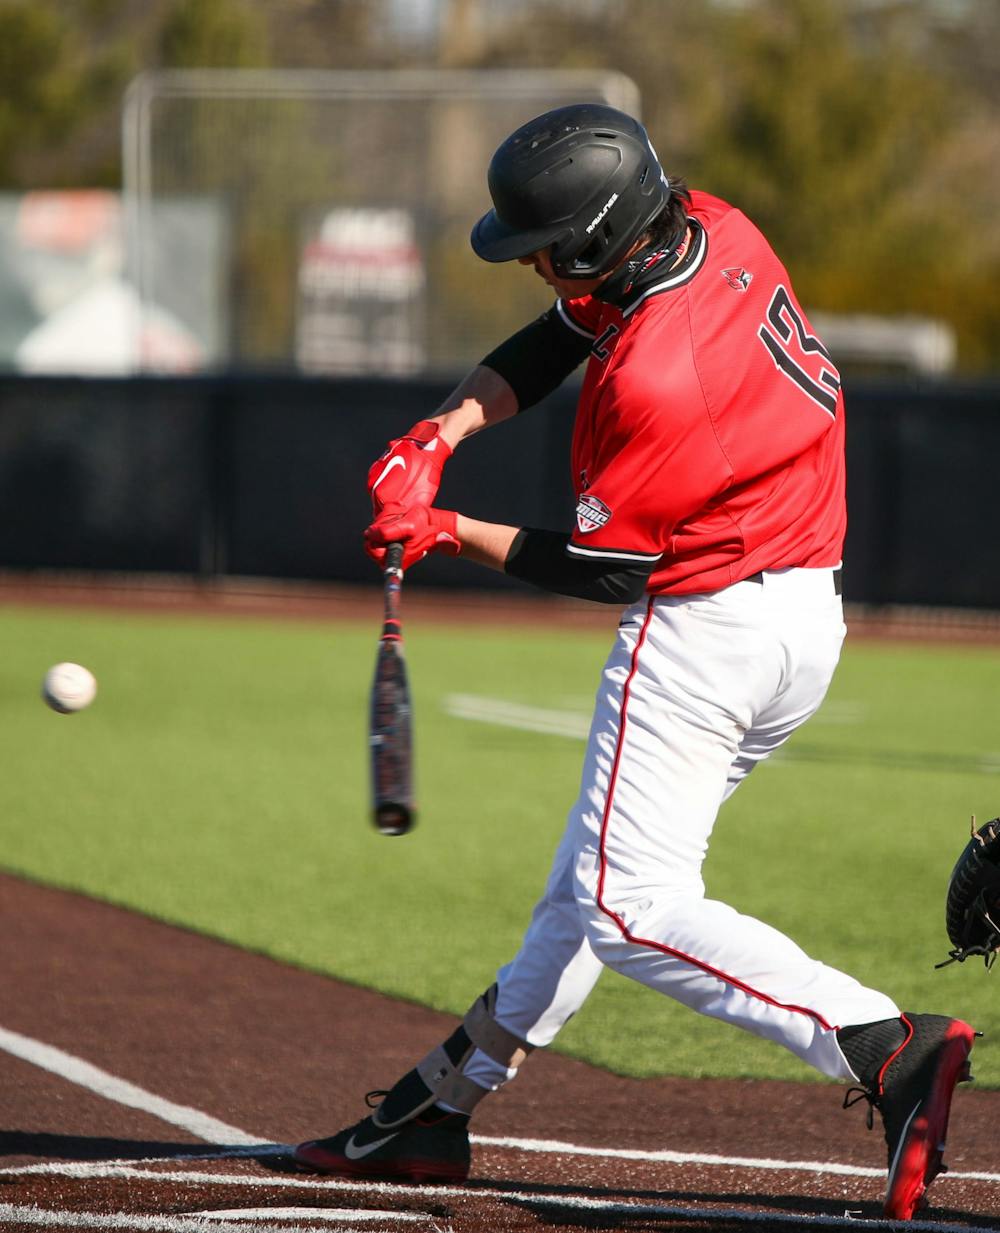 Junior first baseman Trenton Quartermaine hits the ball March 20, 2021, at First Merchants Ballpark. The Cardinals won their second game of the day 3-2 against Western Michigan. Jaden Whiteman, DN